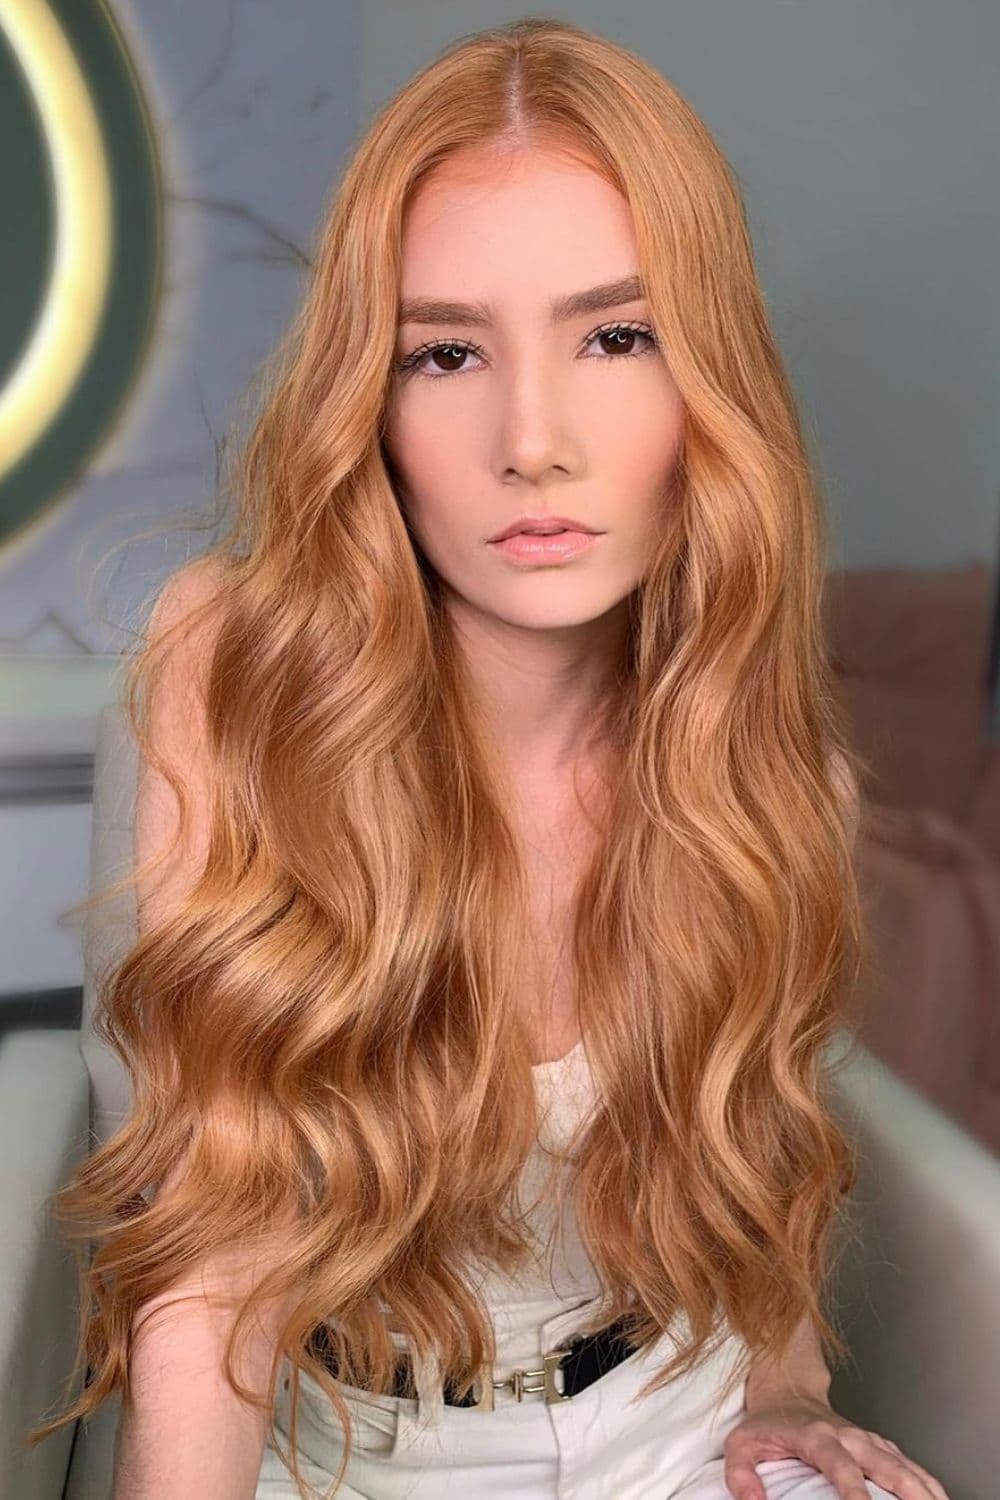 A woman with long wavy strawberry blonde hair.